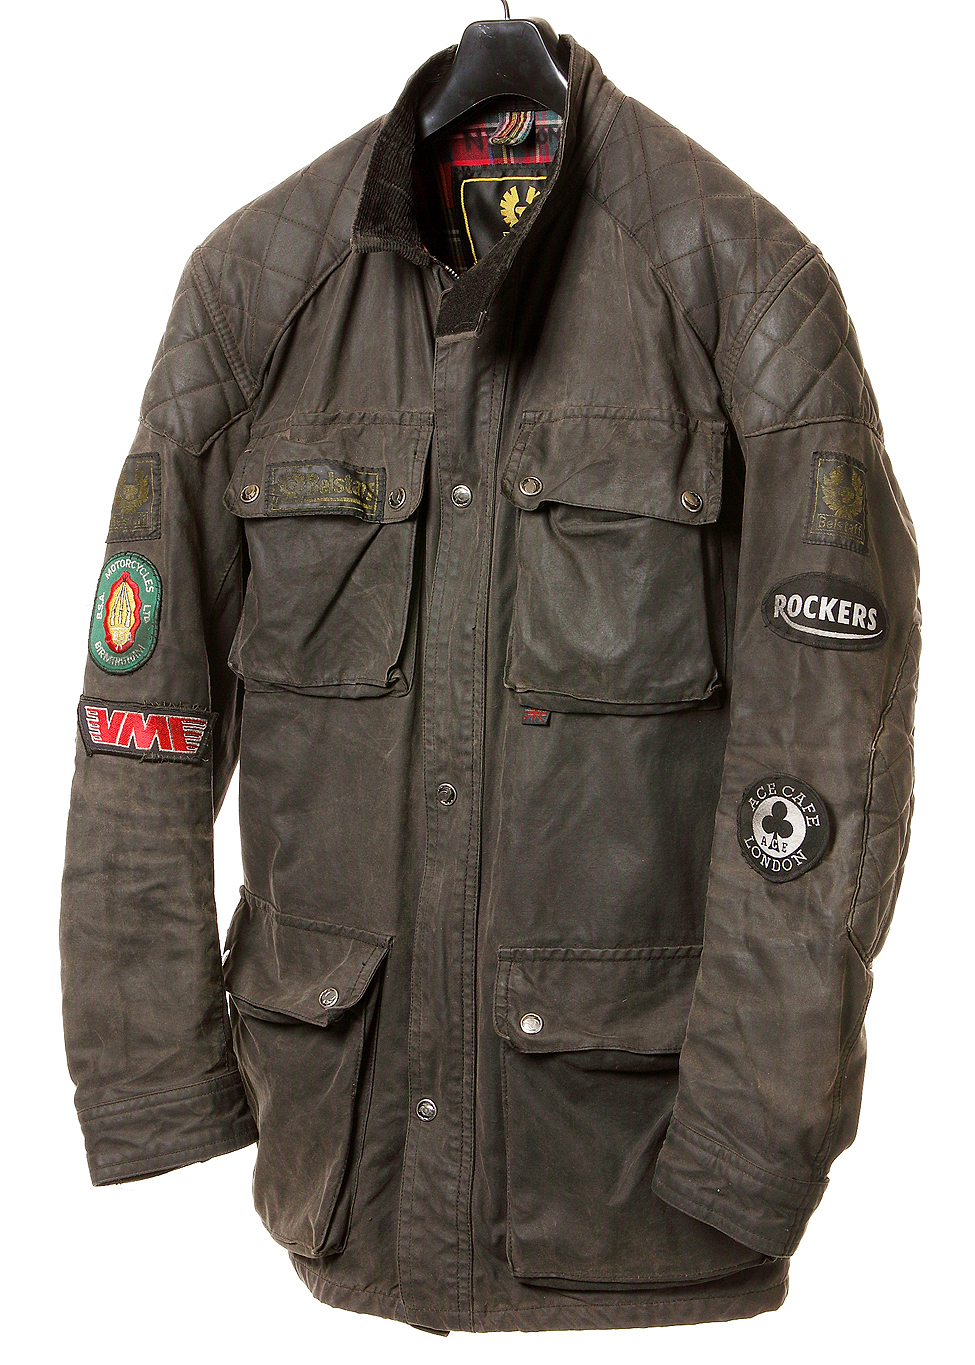 can you use barbour wax on belstaff